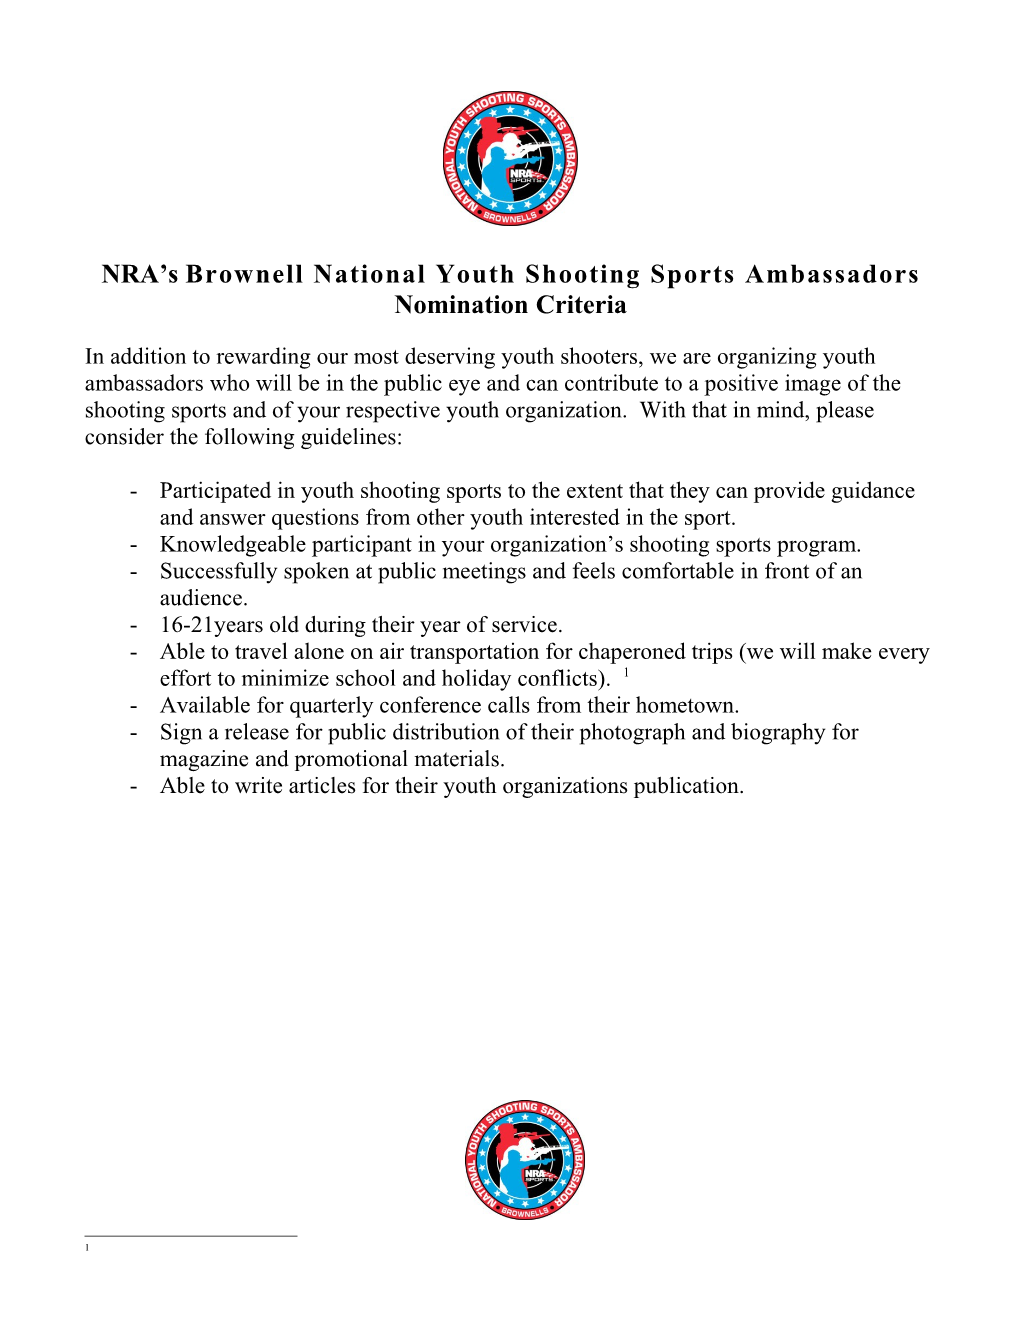 NRA S Brownell National Youth Shooting Sports Ambassadors